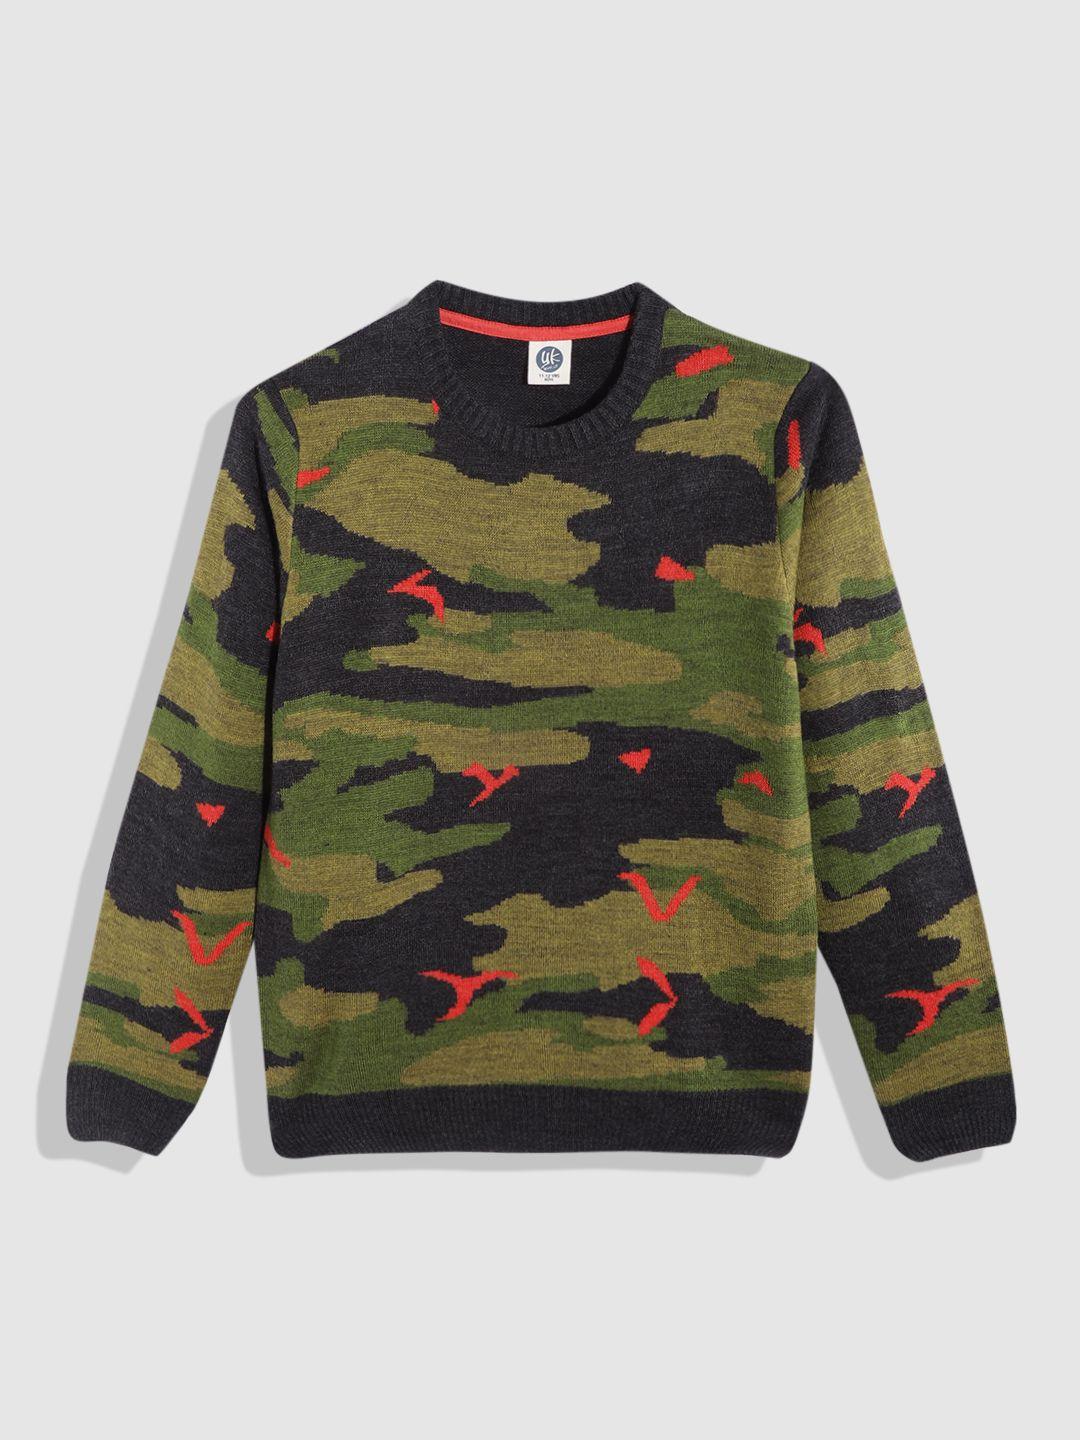 yk-boys-olive-green-&-black-camouflage-printed-pullover